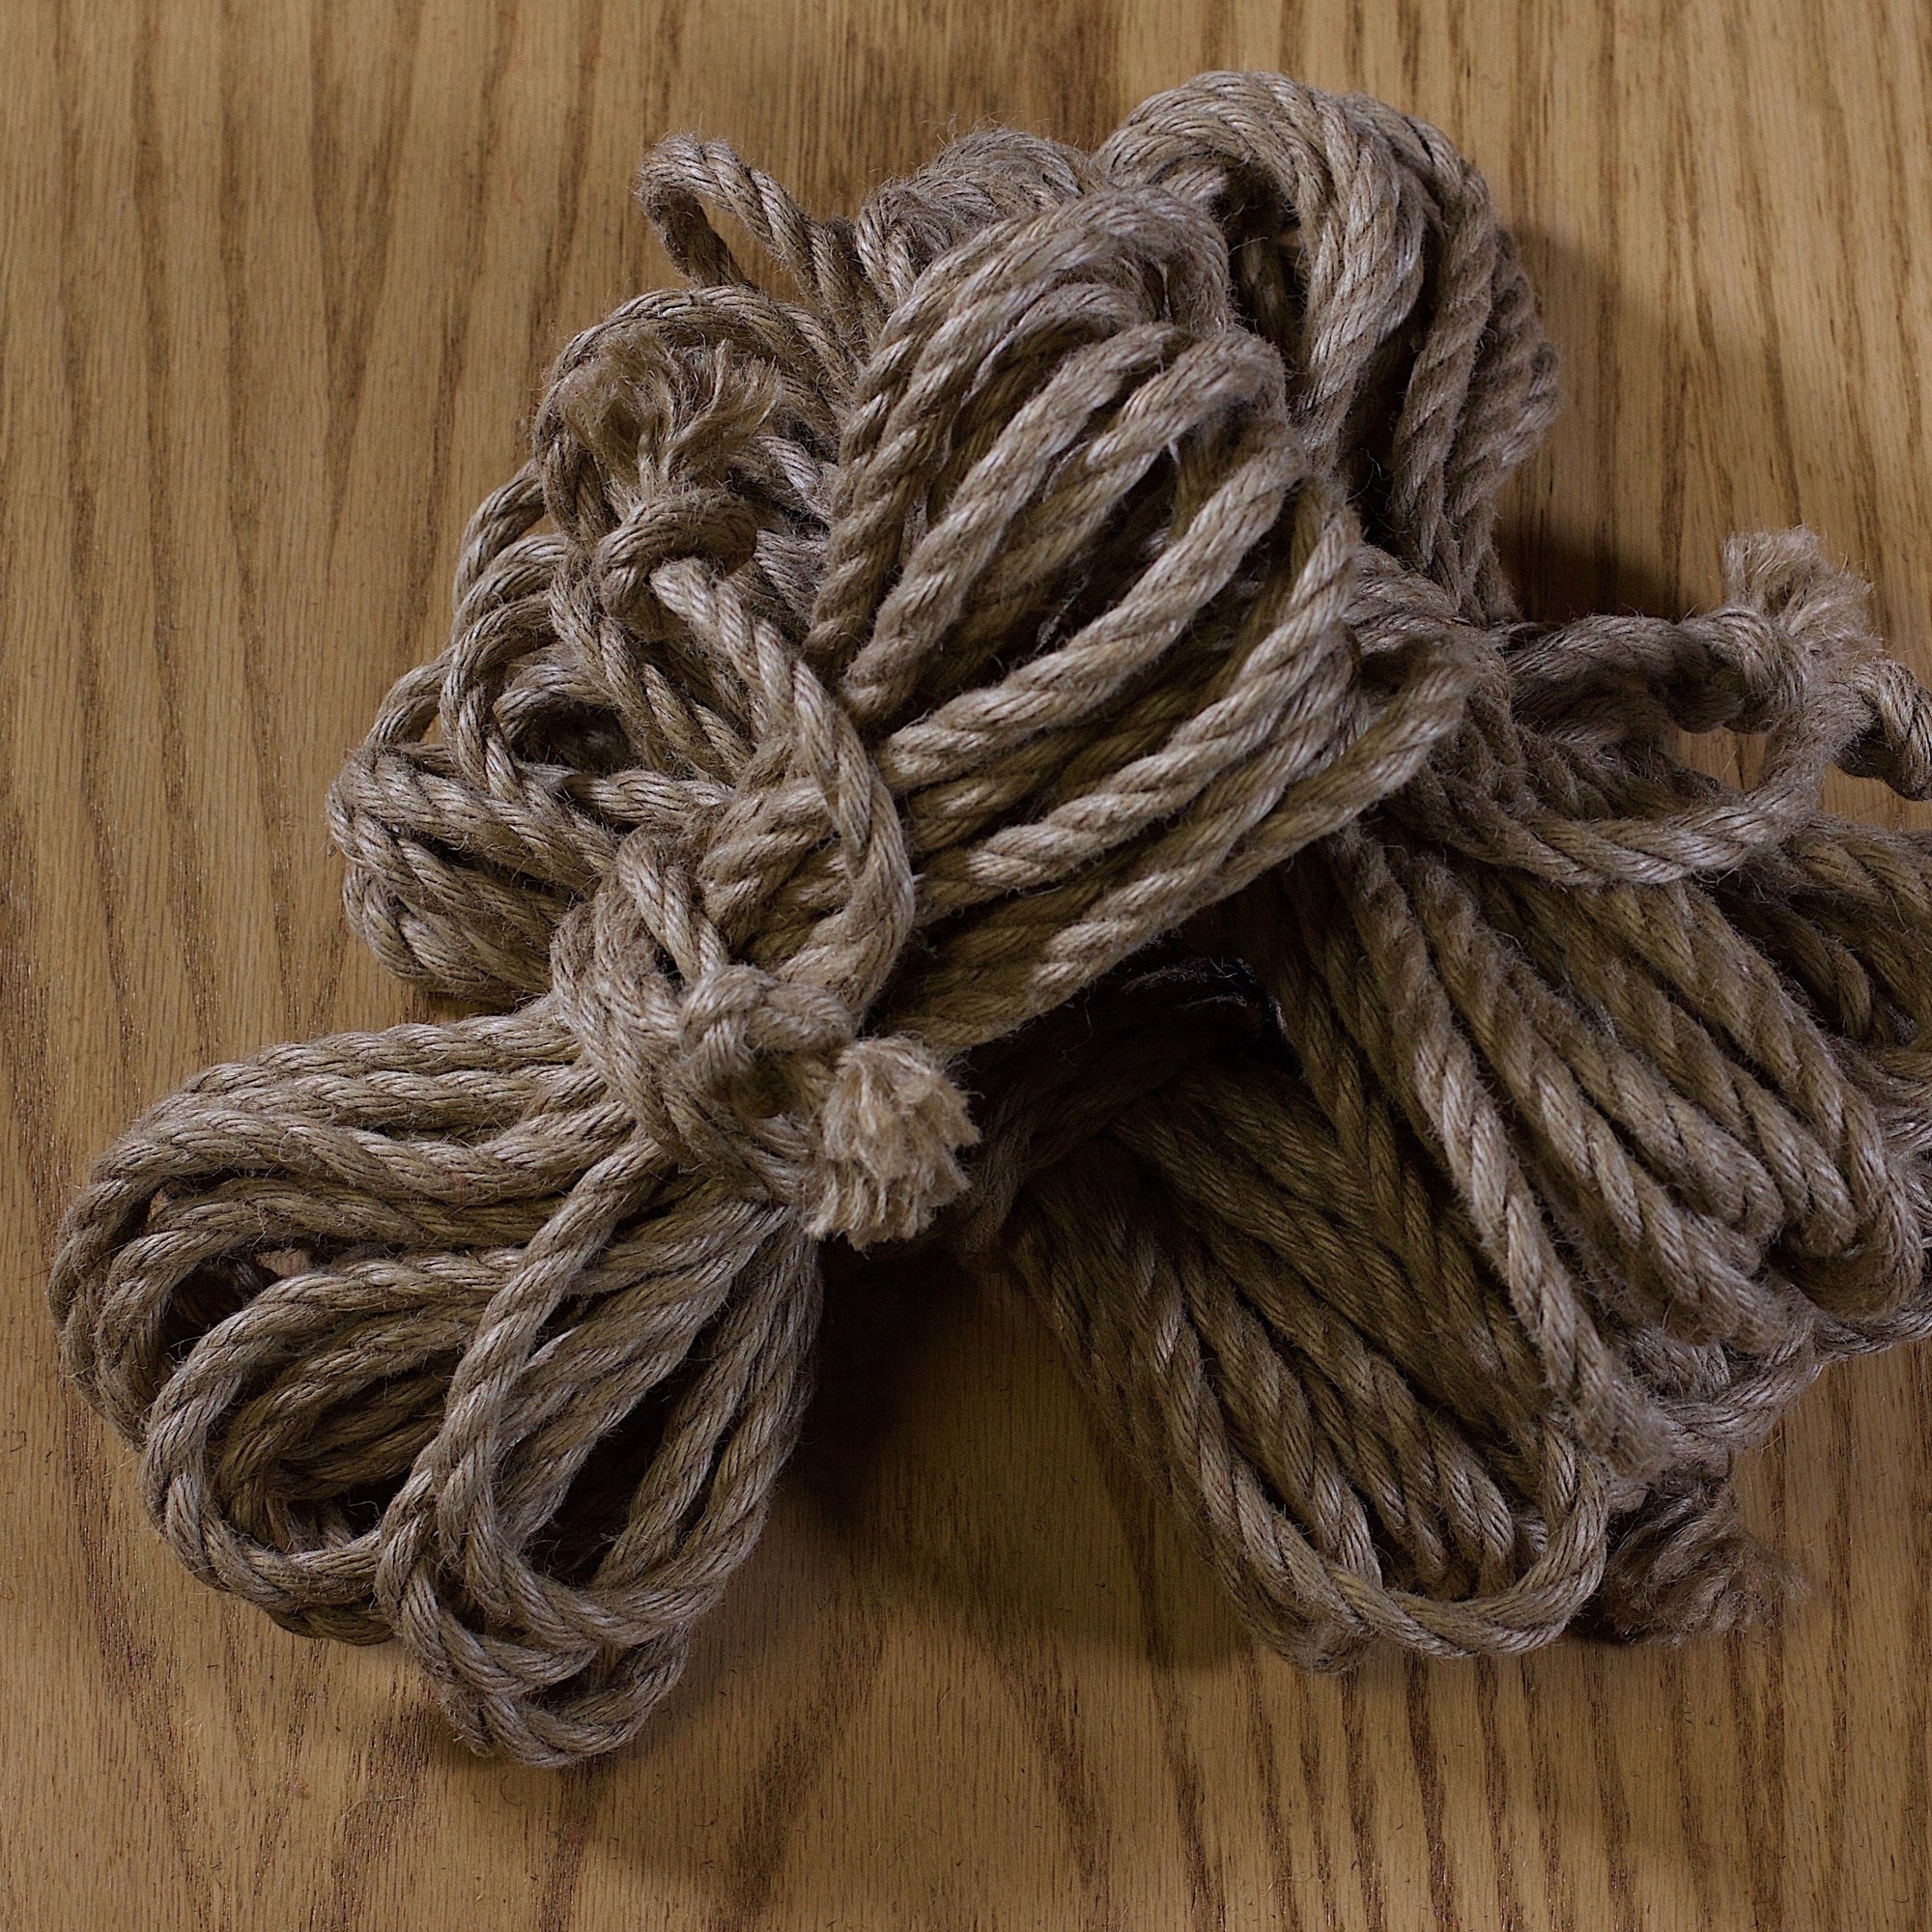 Jute rope Shibari quality by Tension - Beige (Natural)